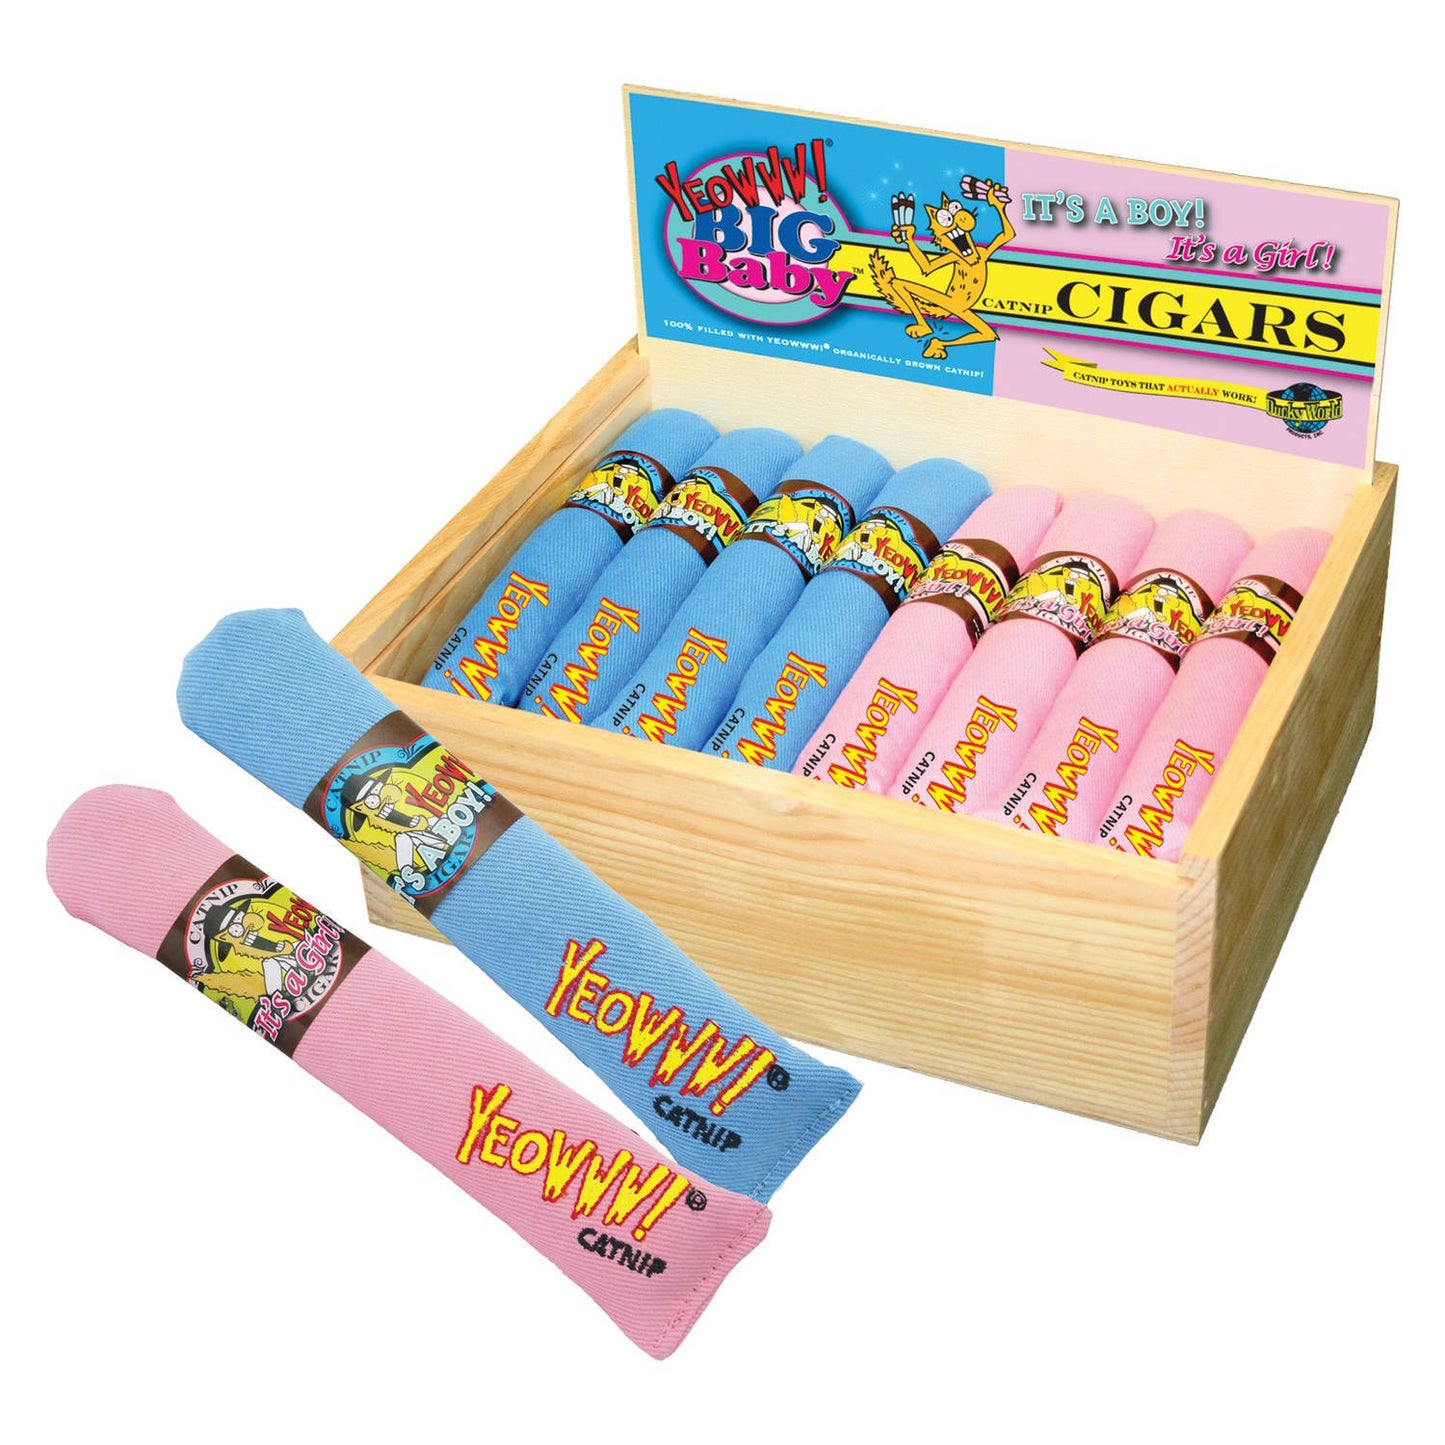 24 Cigars Pink and Blue with Birch Wood Box